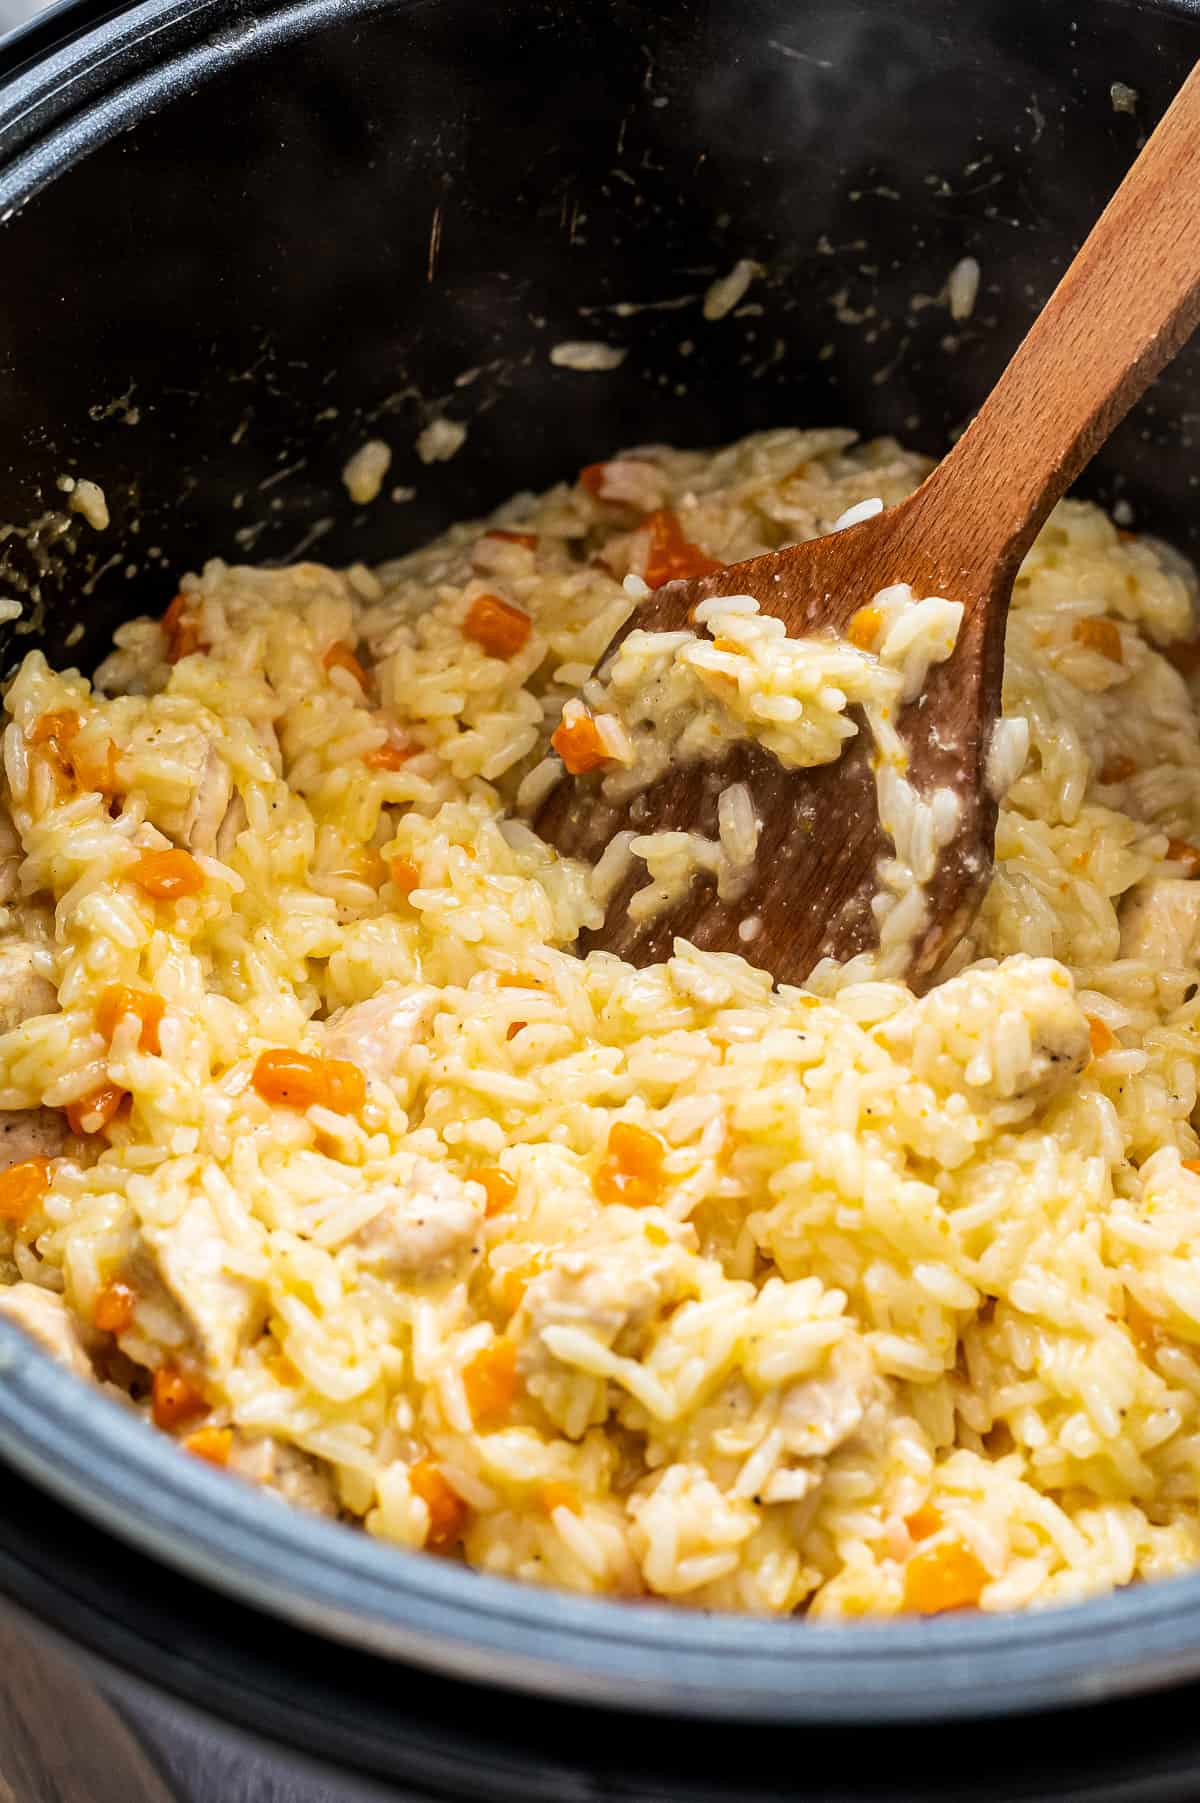 Instant Pot with chicken and rice in it being stirred by wooden spoon